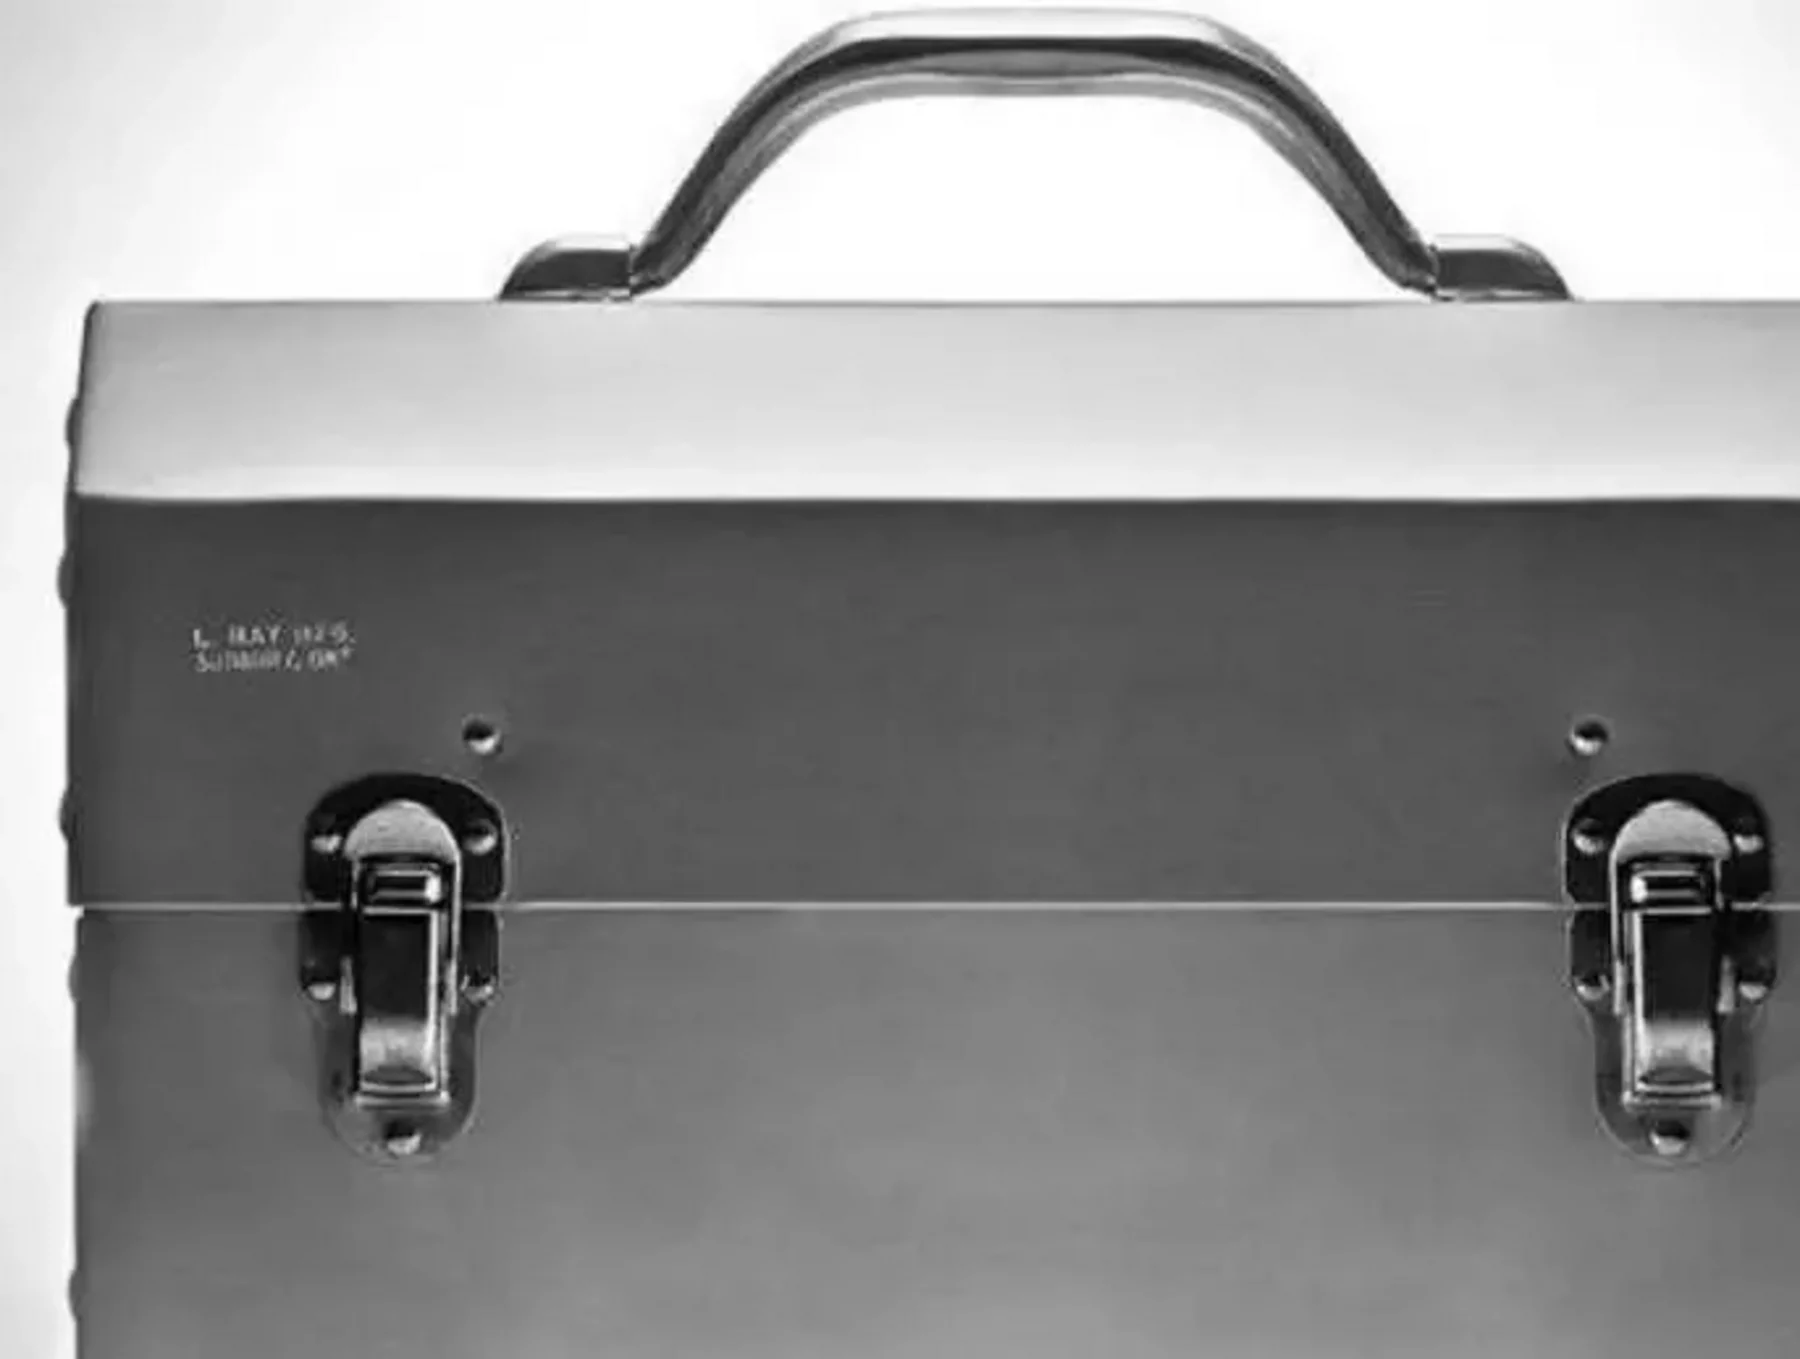 Nickel-Plated Aluminum Lunch Box